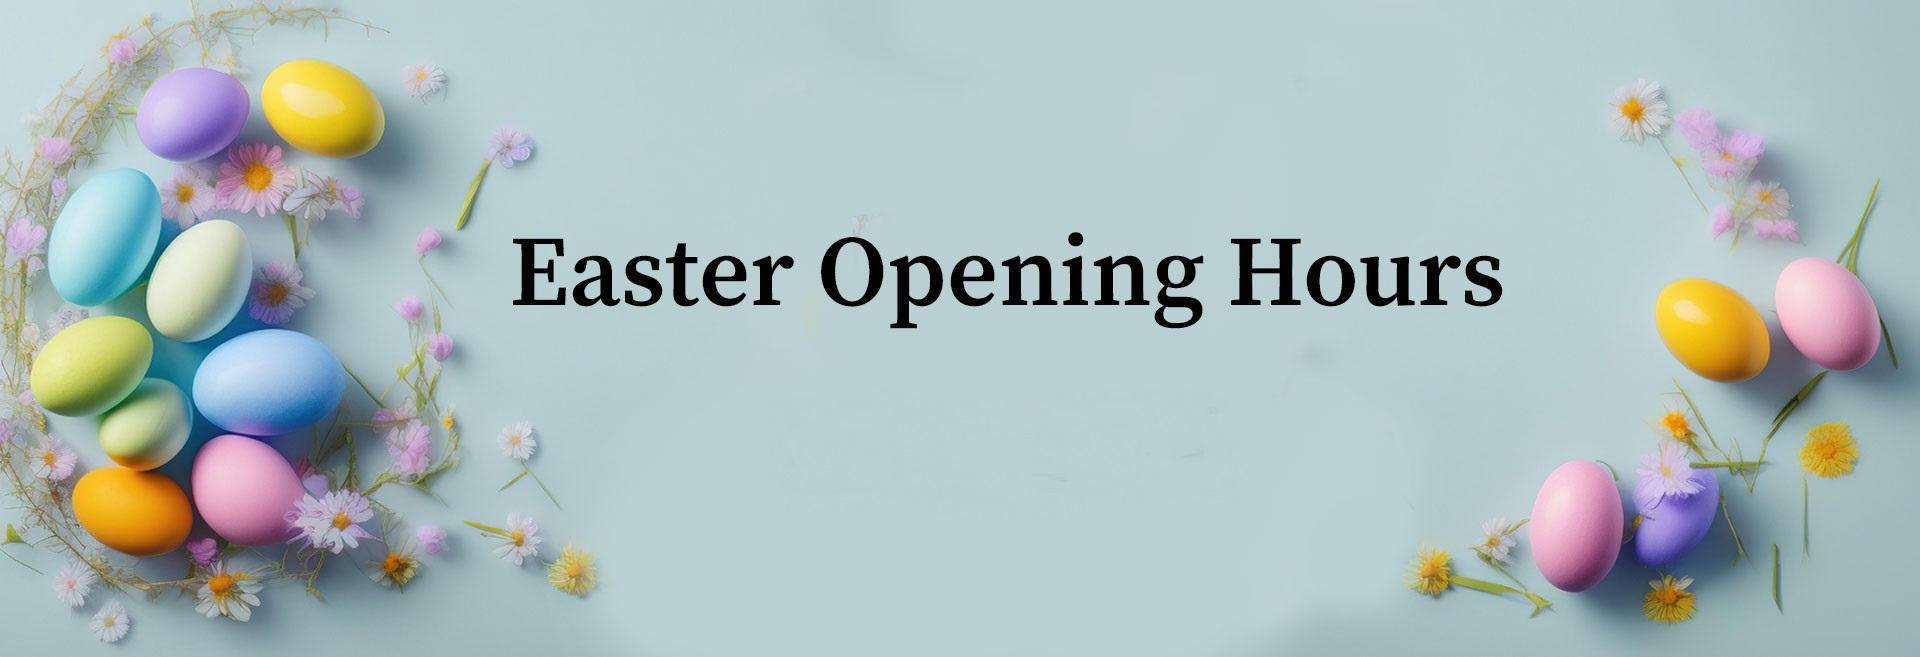 Easter Opening Hours banner 1